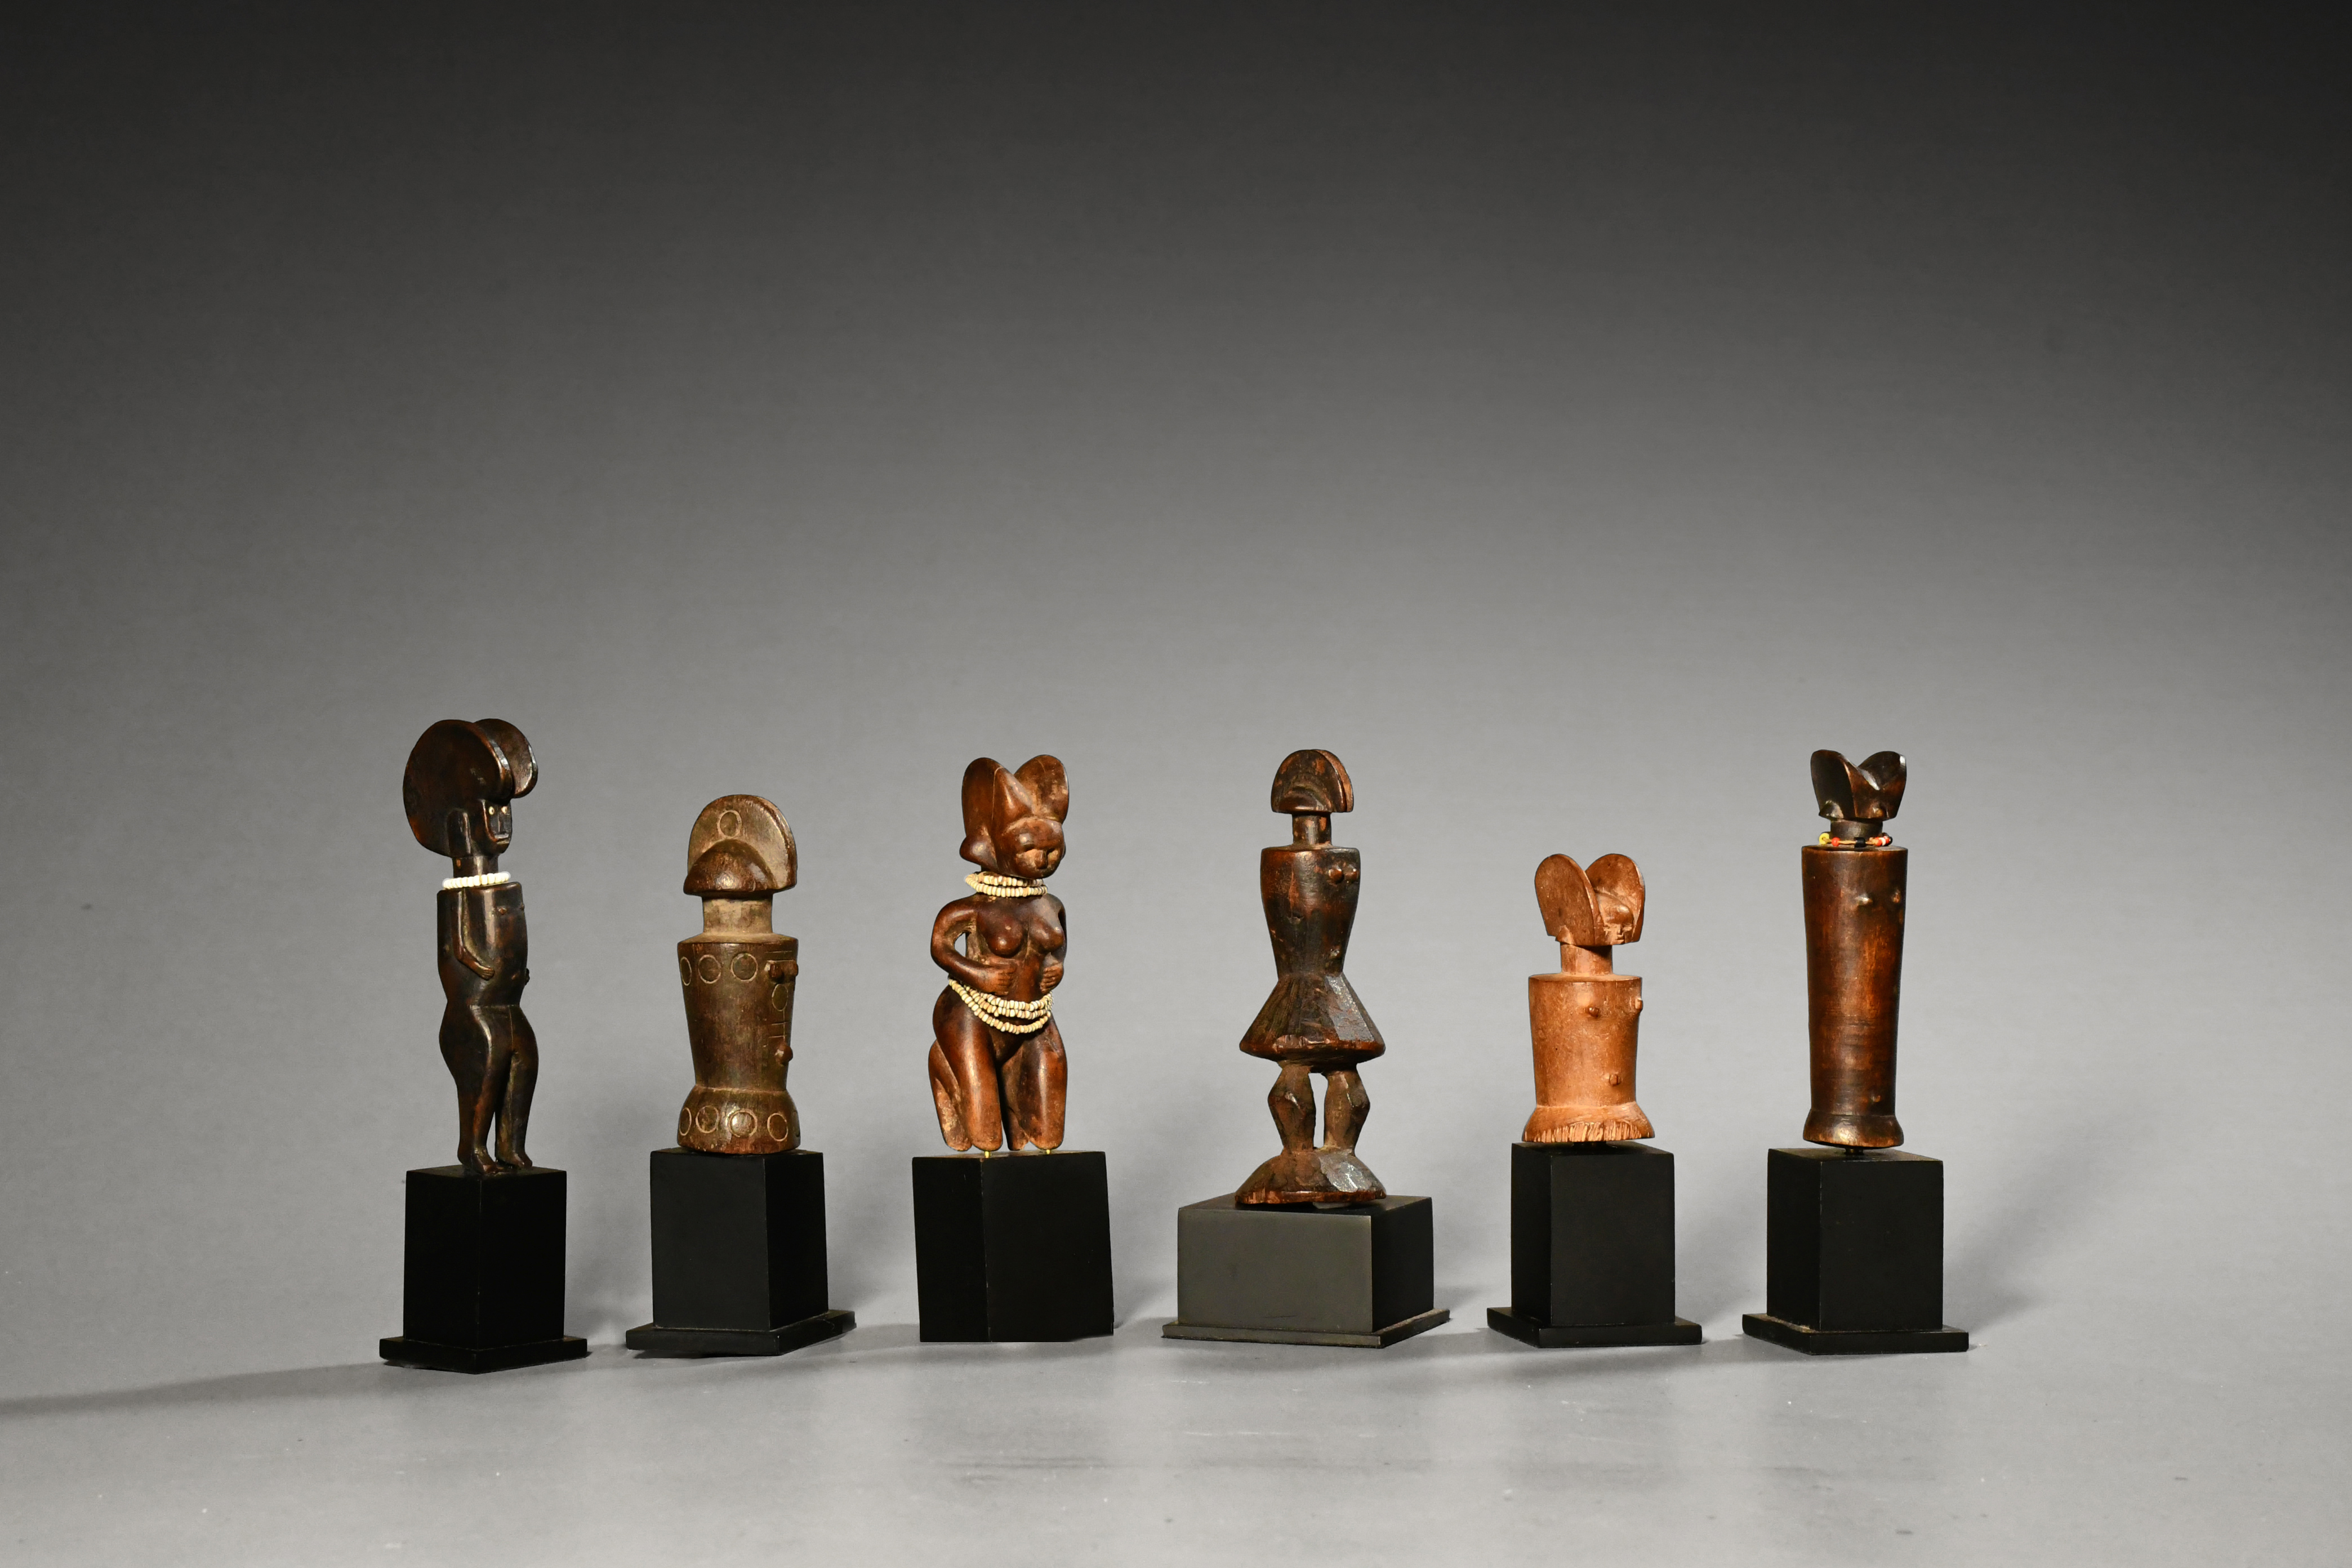 A Fine Collection of Antique African Kwere or Zaramo Doll Figures Tanzania East Africa